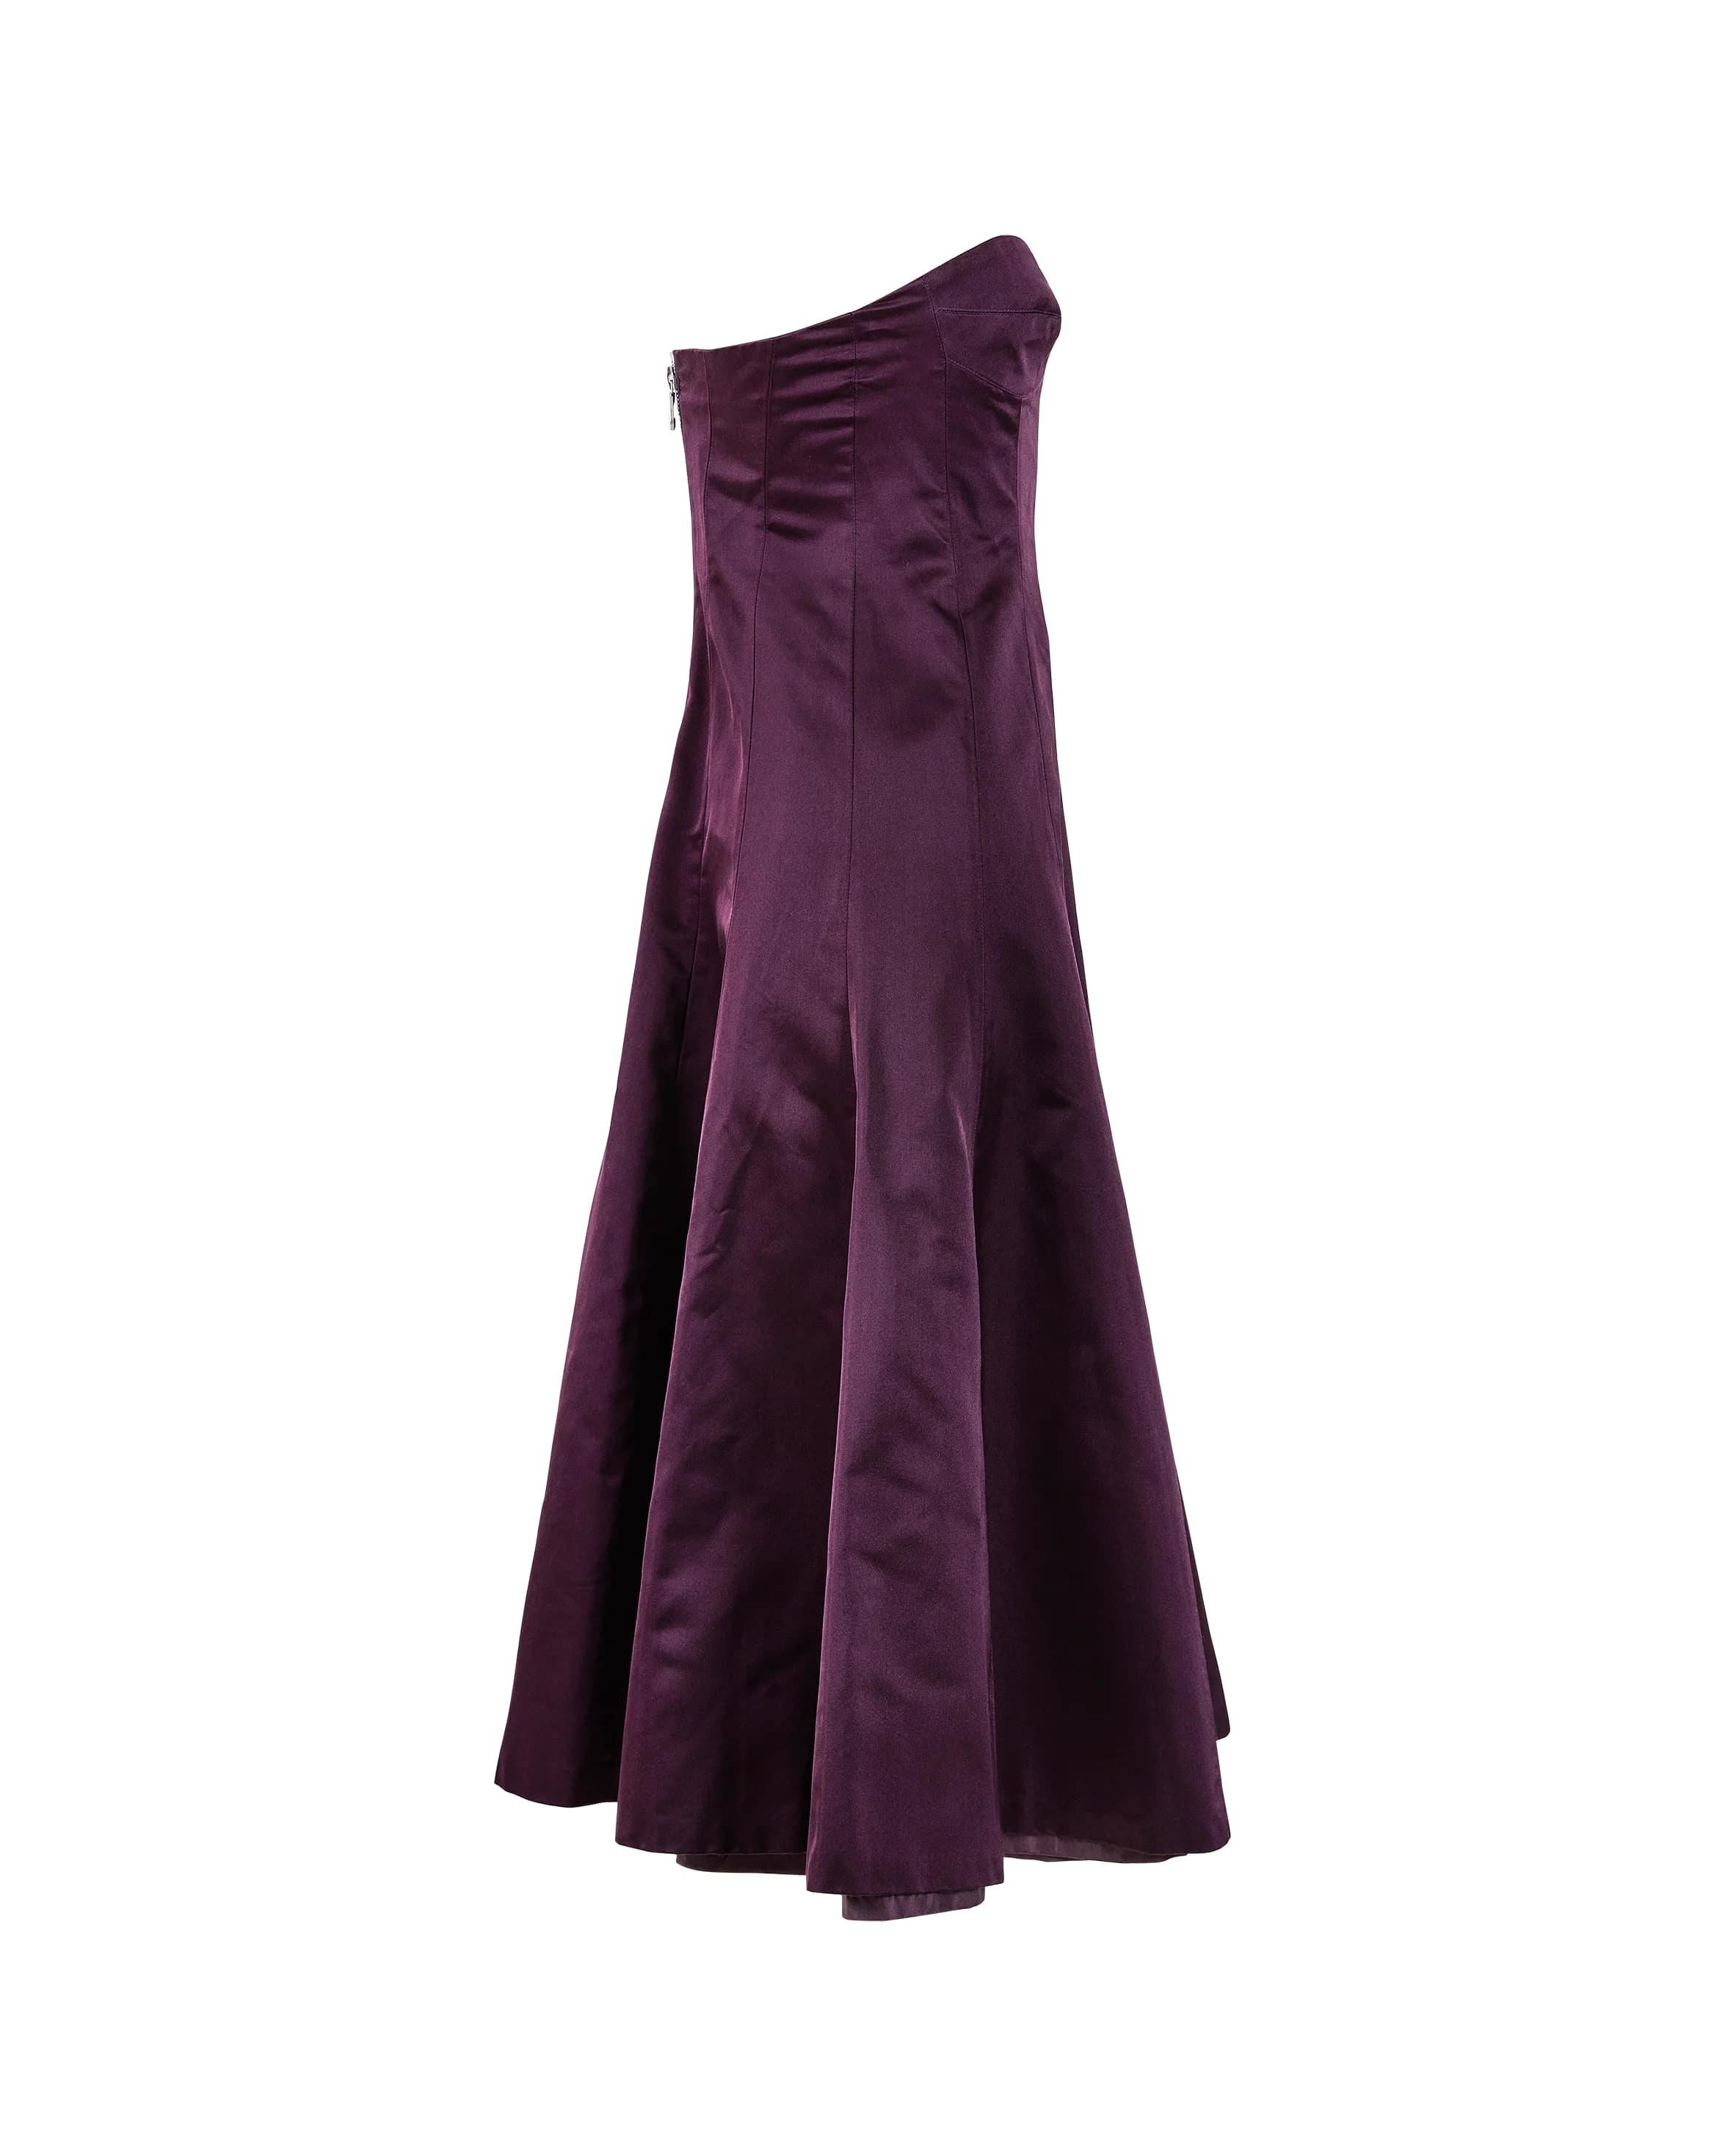 A/W 2001 Chloé by Stella McCartney purple strapless silk evening dress. Purple Dupioni silk strapless dress with structured bust, fitted waist and A-line skirt. Back zip closure. As seen on the runway in black colorway.
